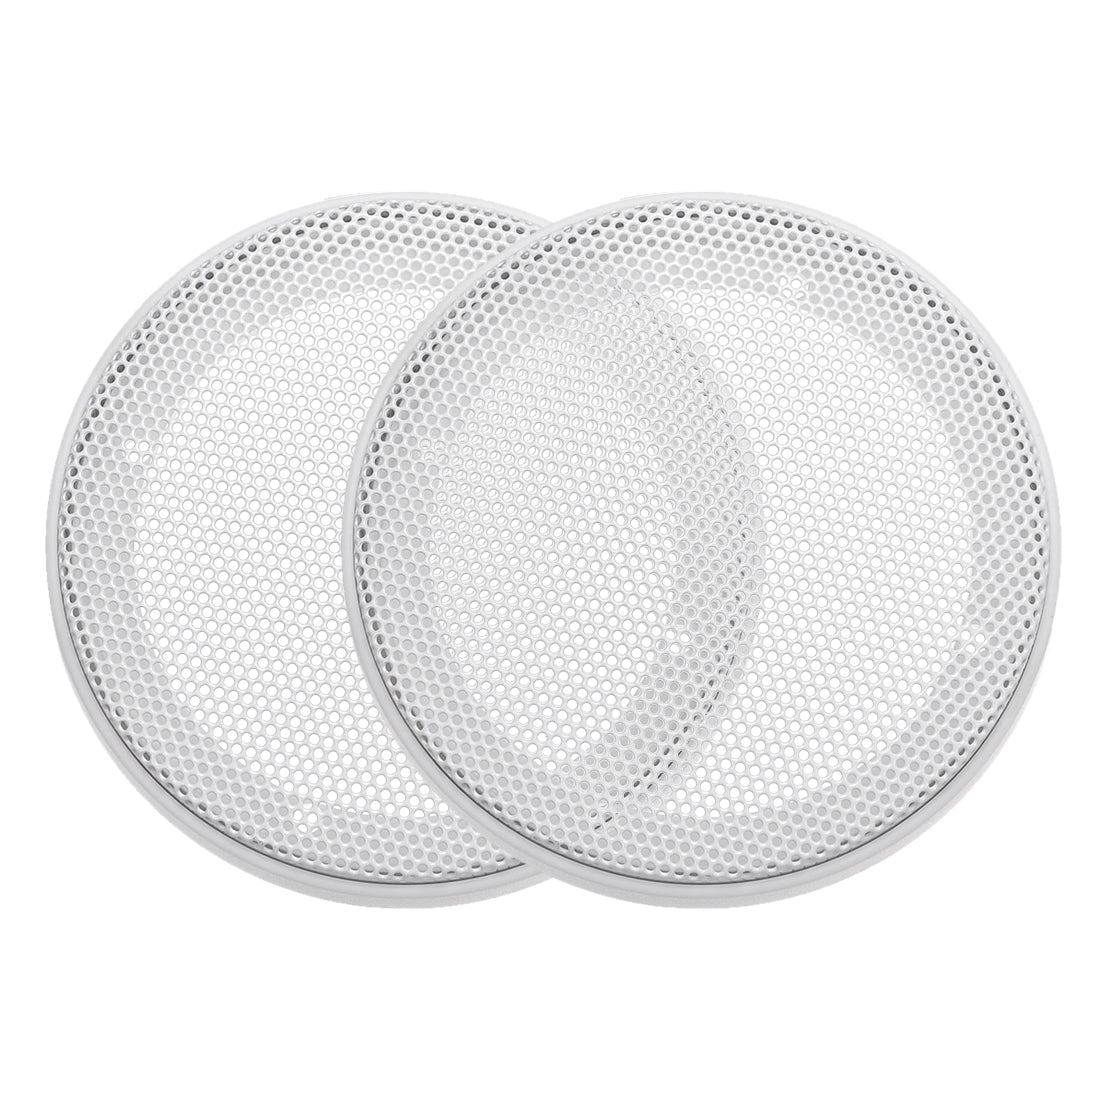 uxcell Uxcell Grill Cover 3 Inch 106.5mm Mesh Circle Subwoofer Guard Protector White 2pcs